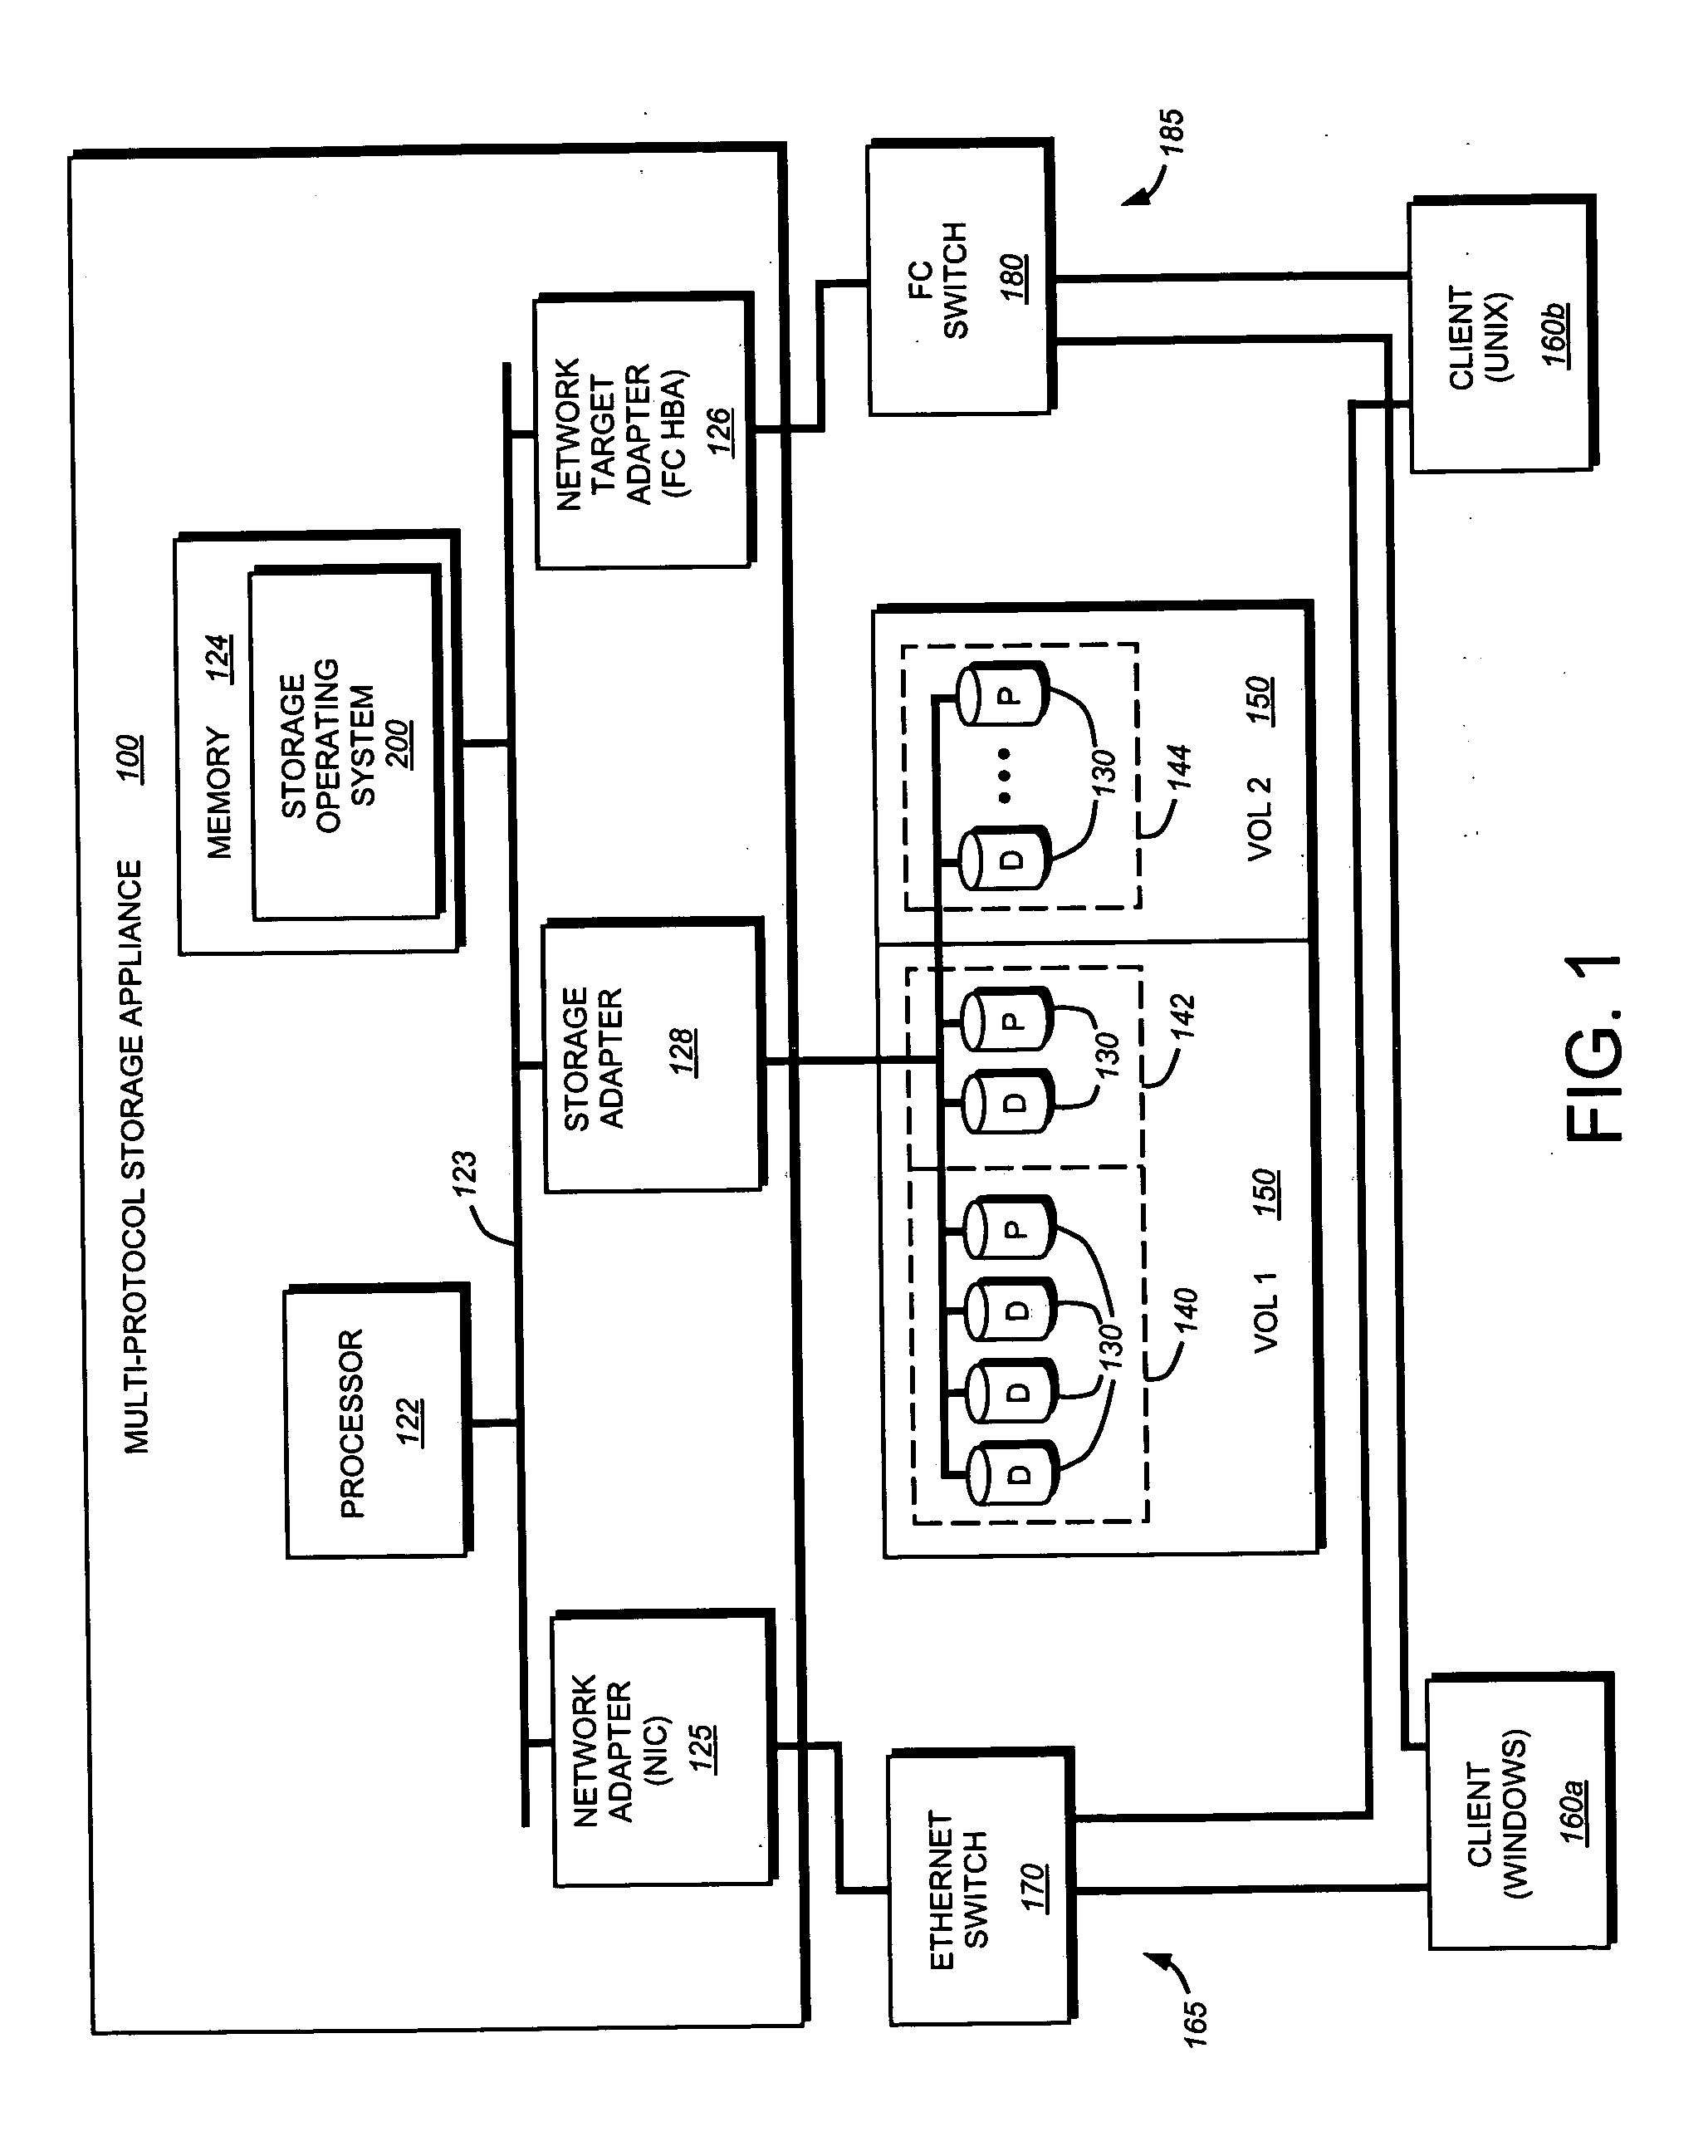 System and method for configuring a storage network utilizing a multi-protocol storage appliance